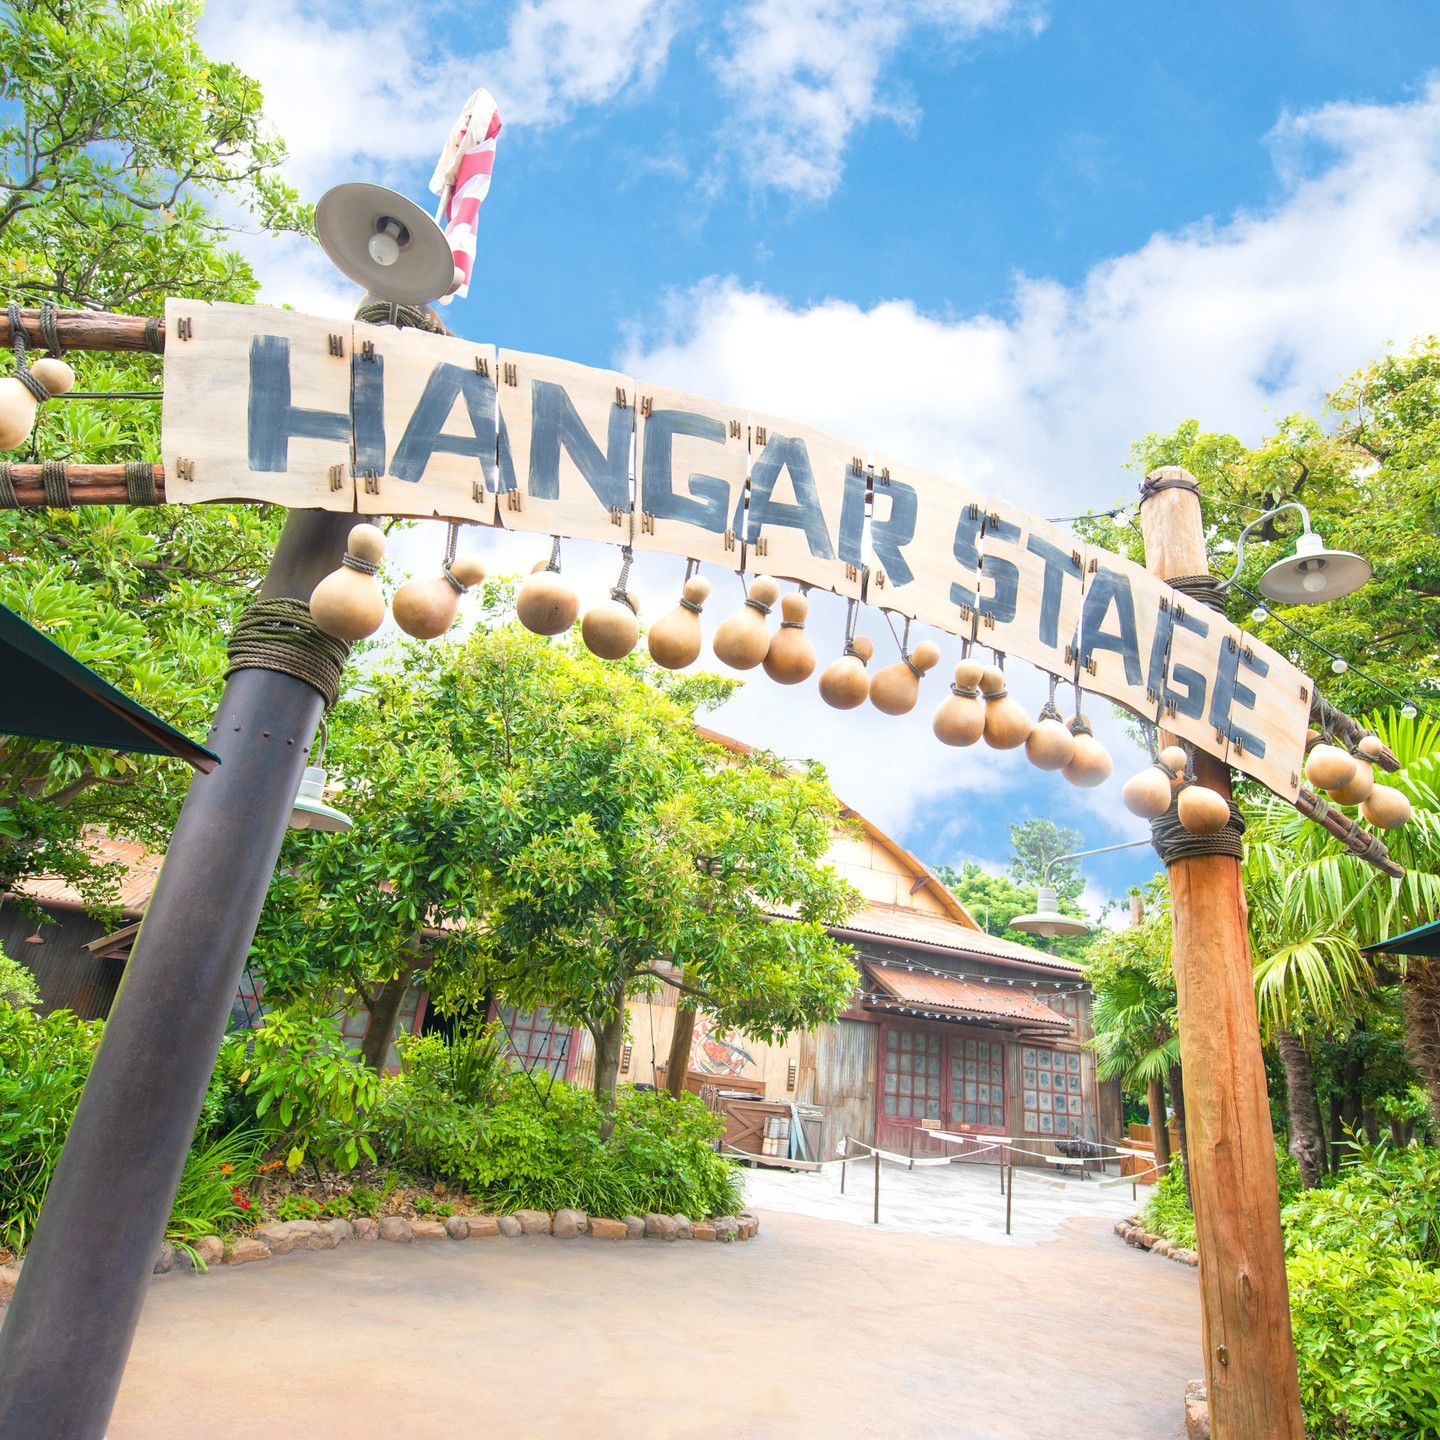 You never know what you will discover in the Jungle!
夏気分が高まる～☀
#hangarstage...的圖像